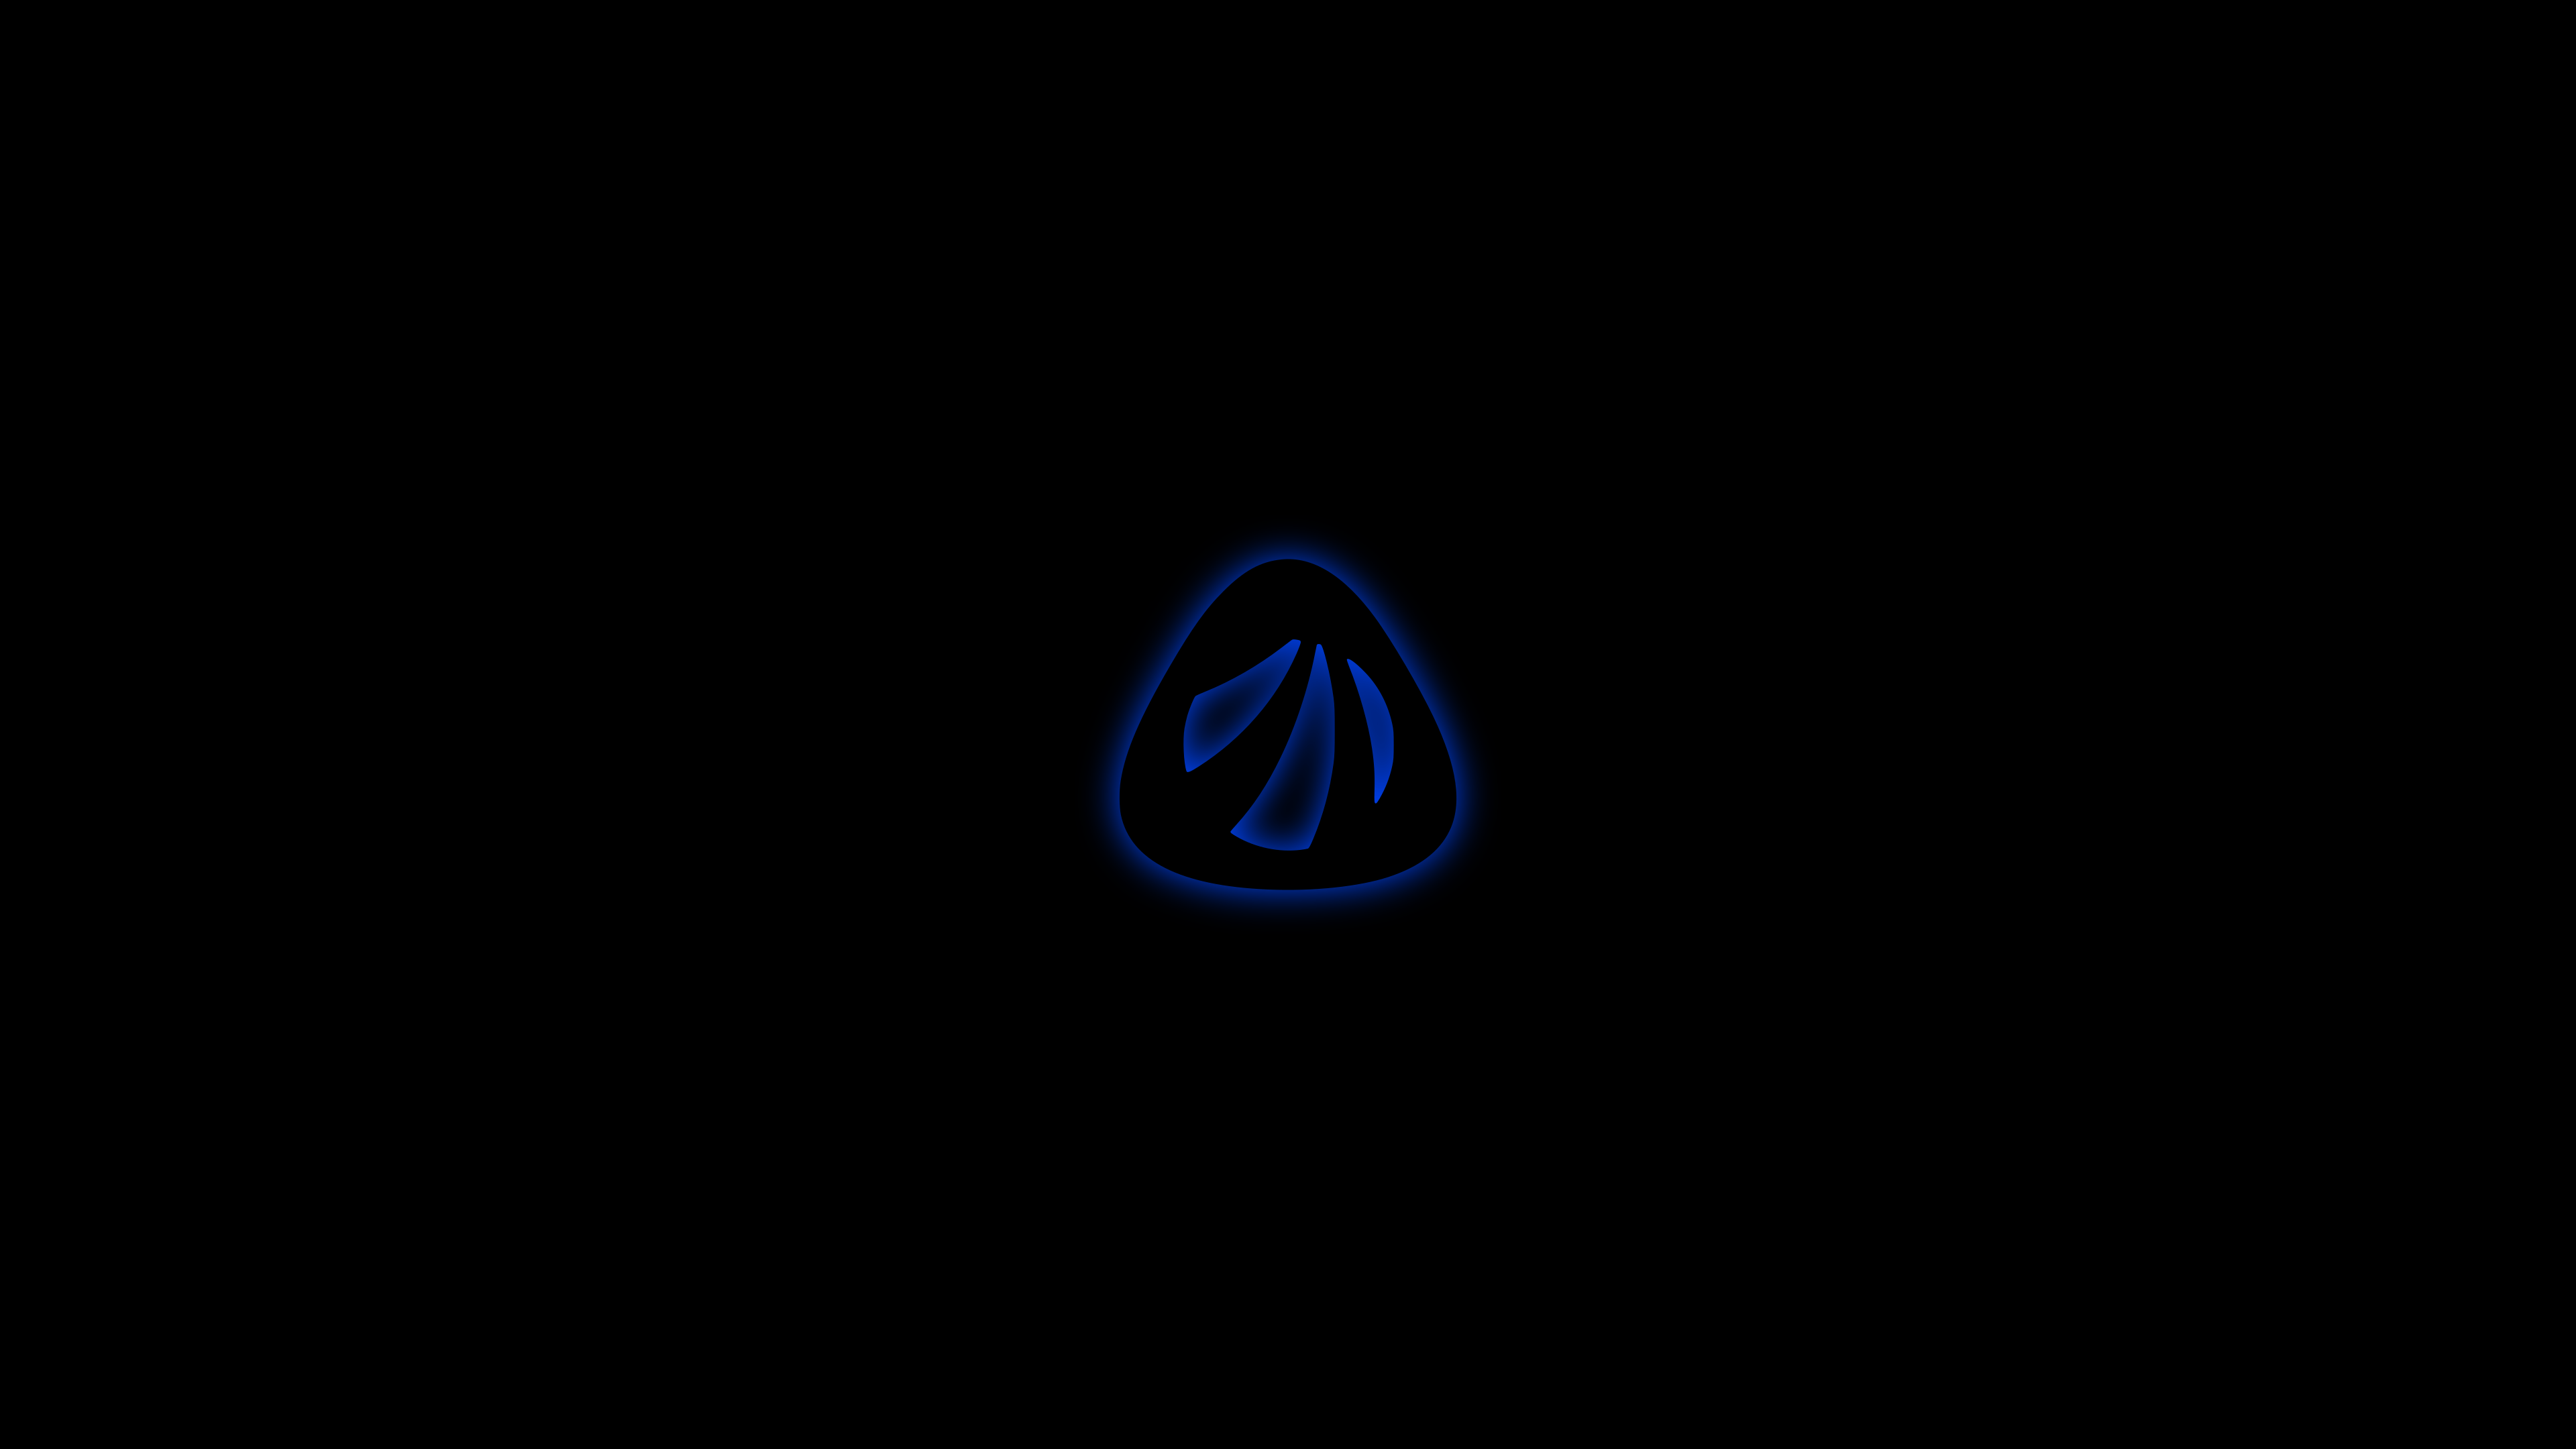 A couple black and blue Antergos wallpaper. If anyone wants a